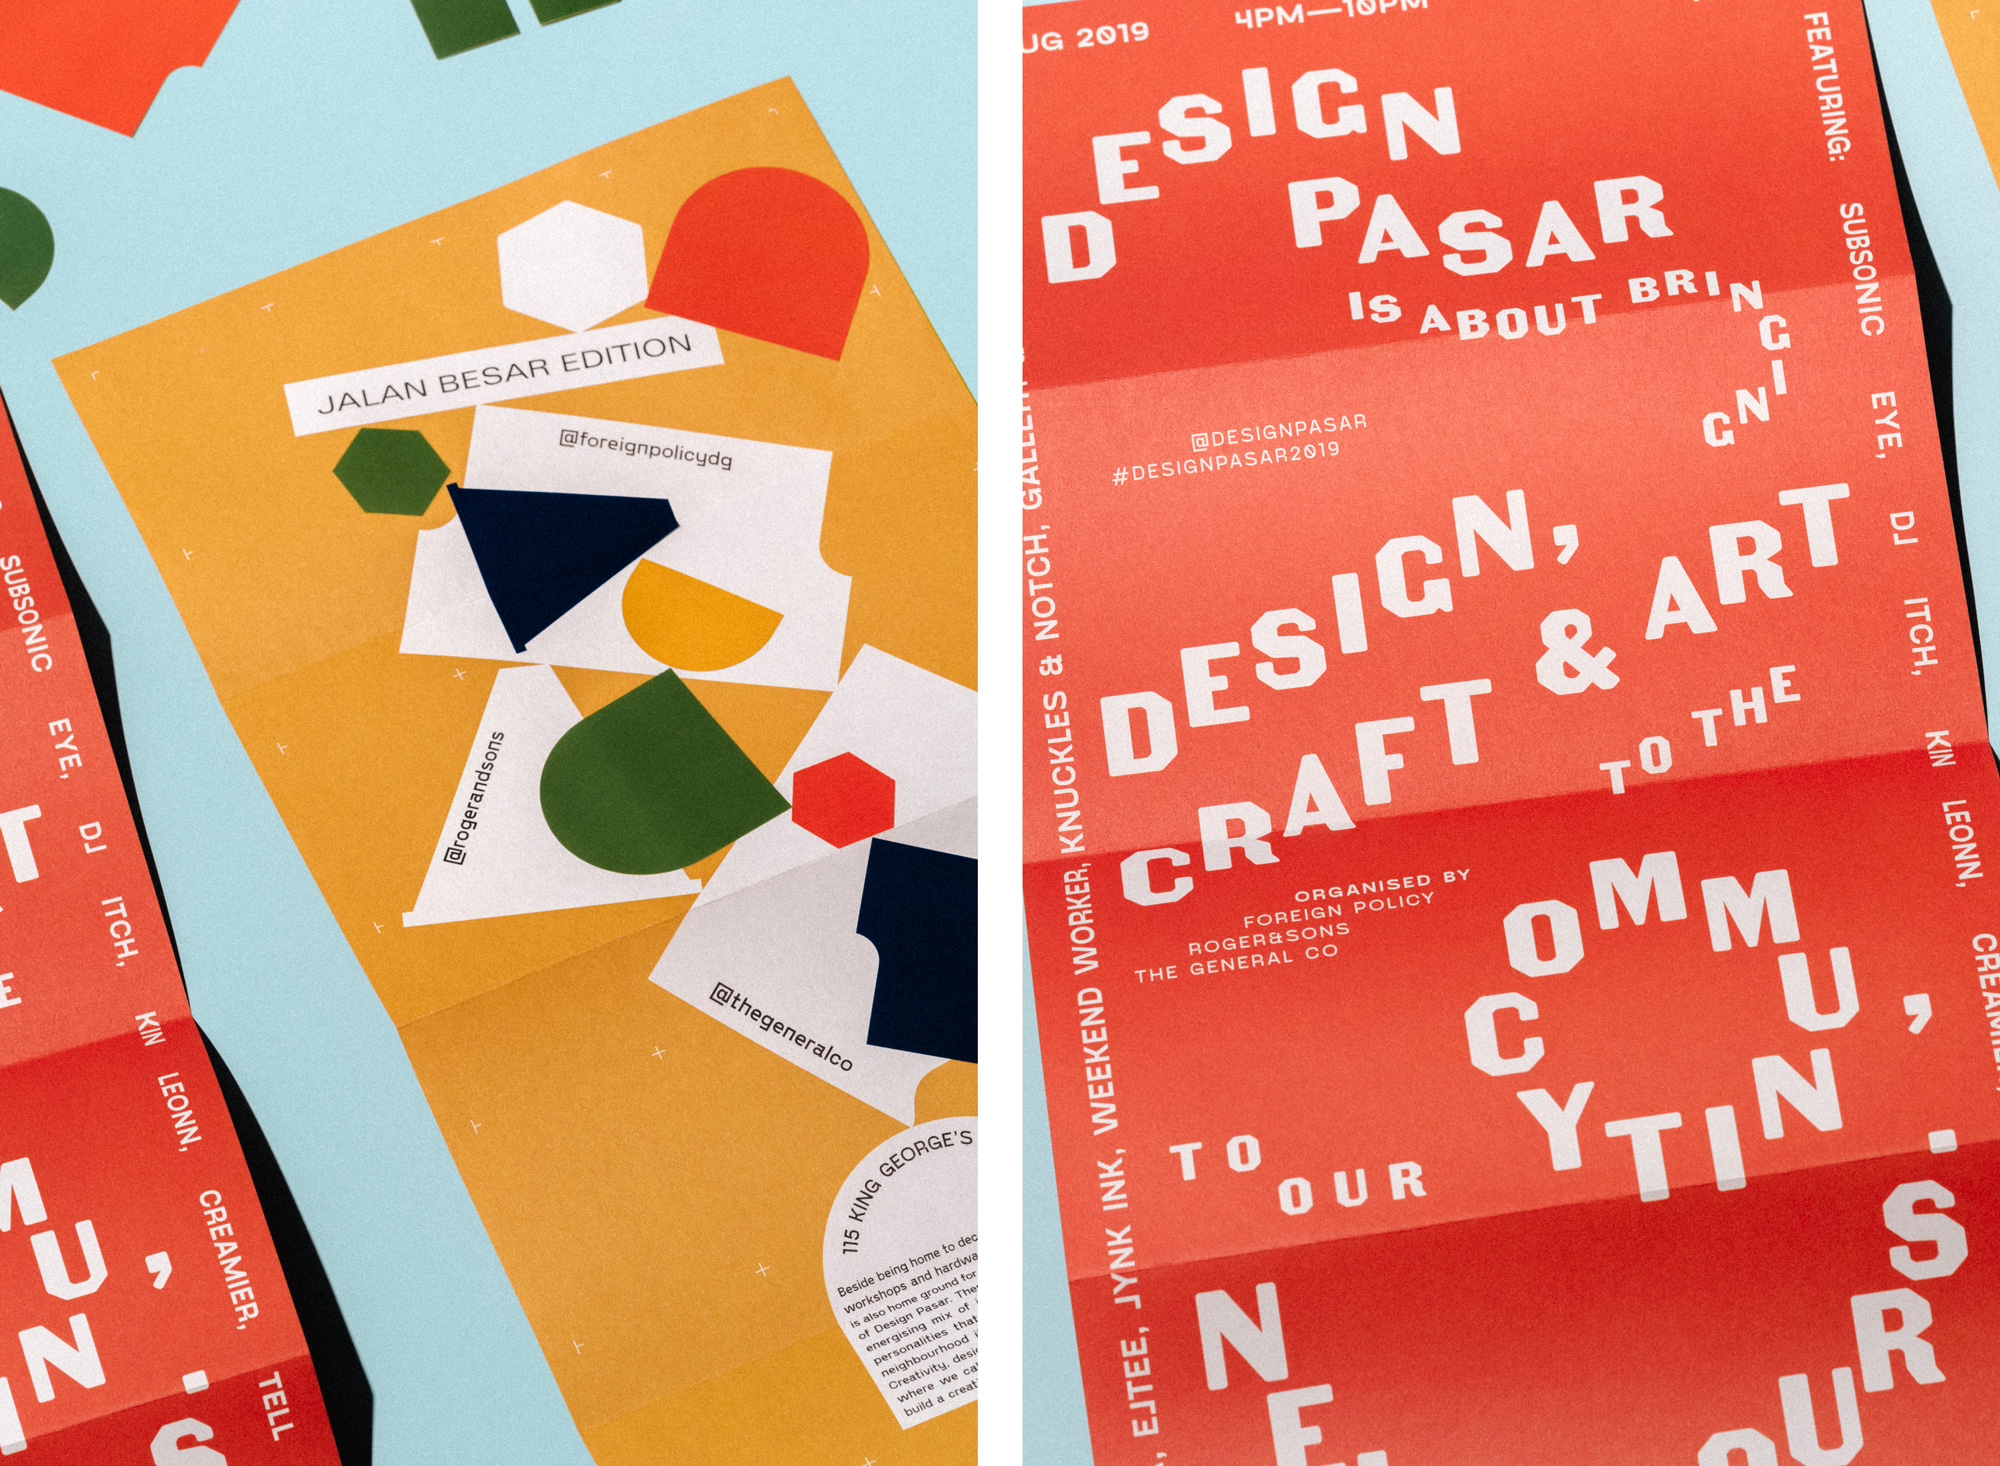 New Logo and Identity for Design Pasar by Foreign Policy